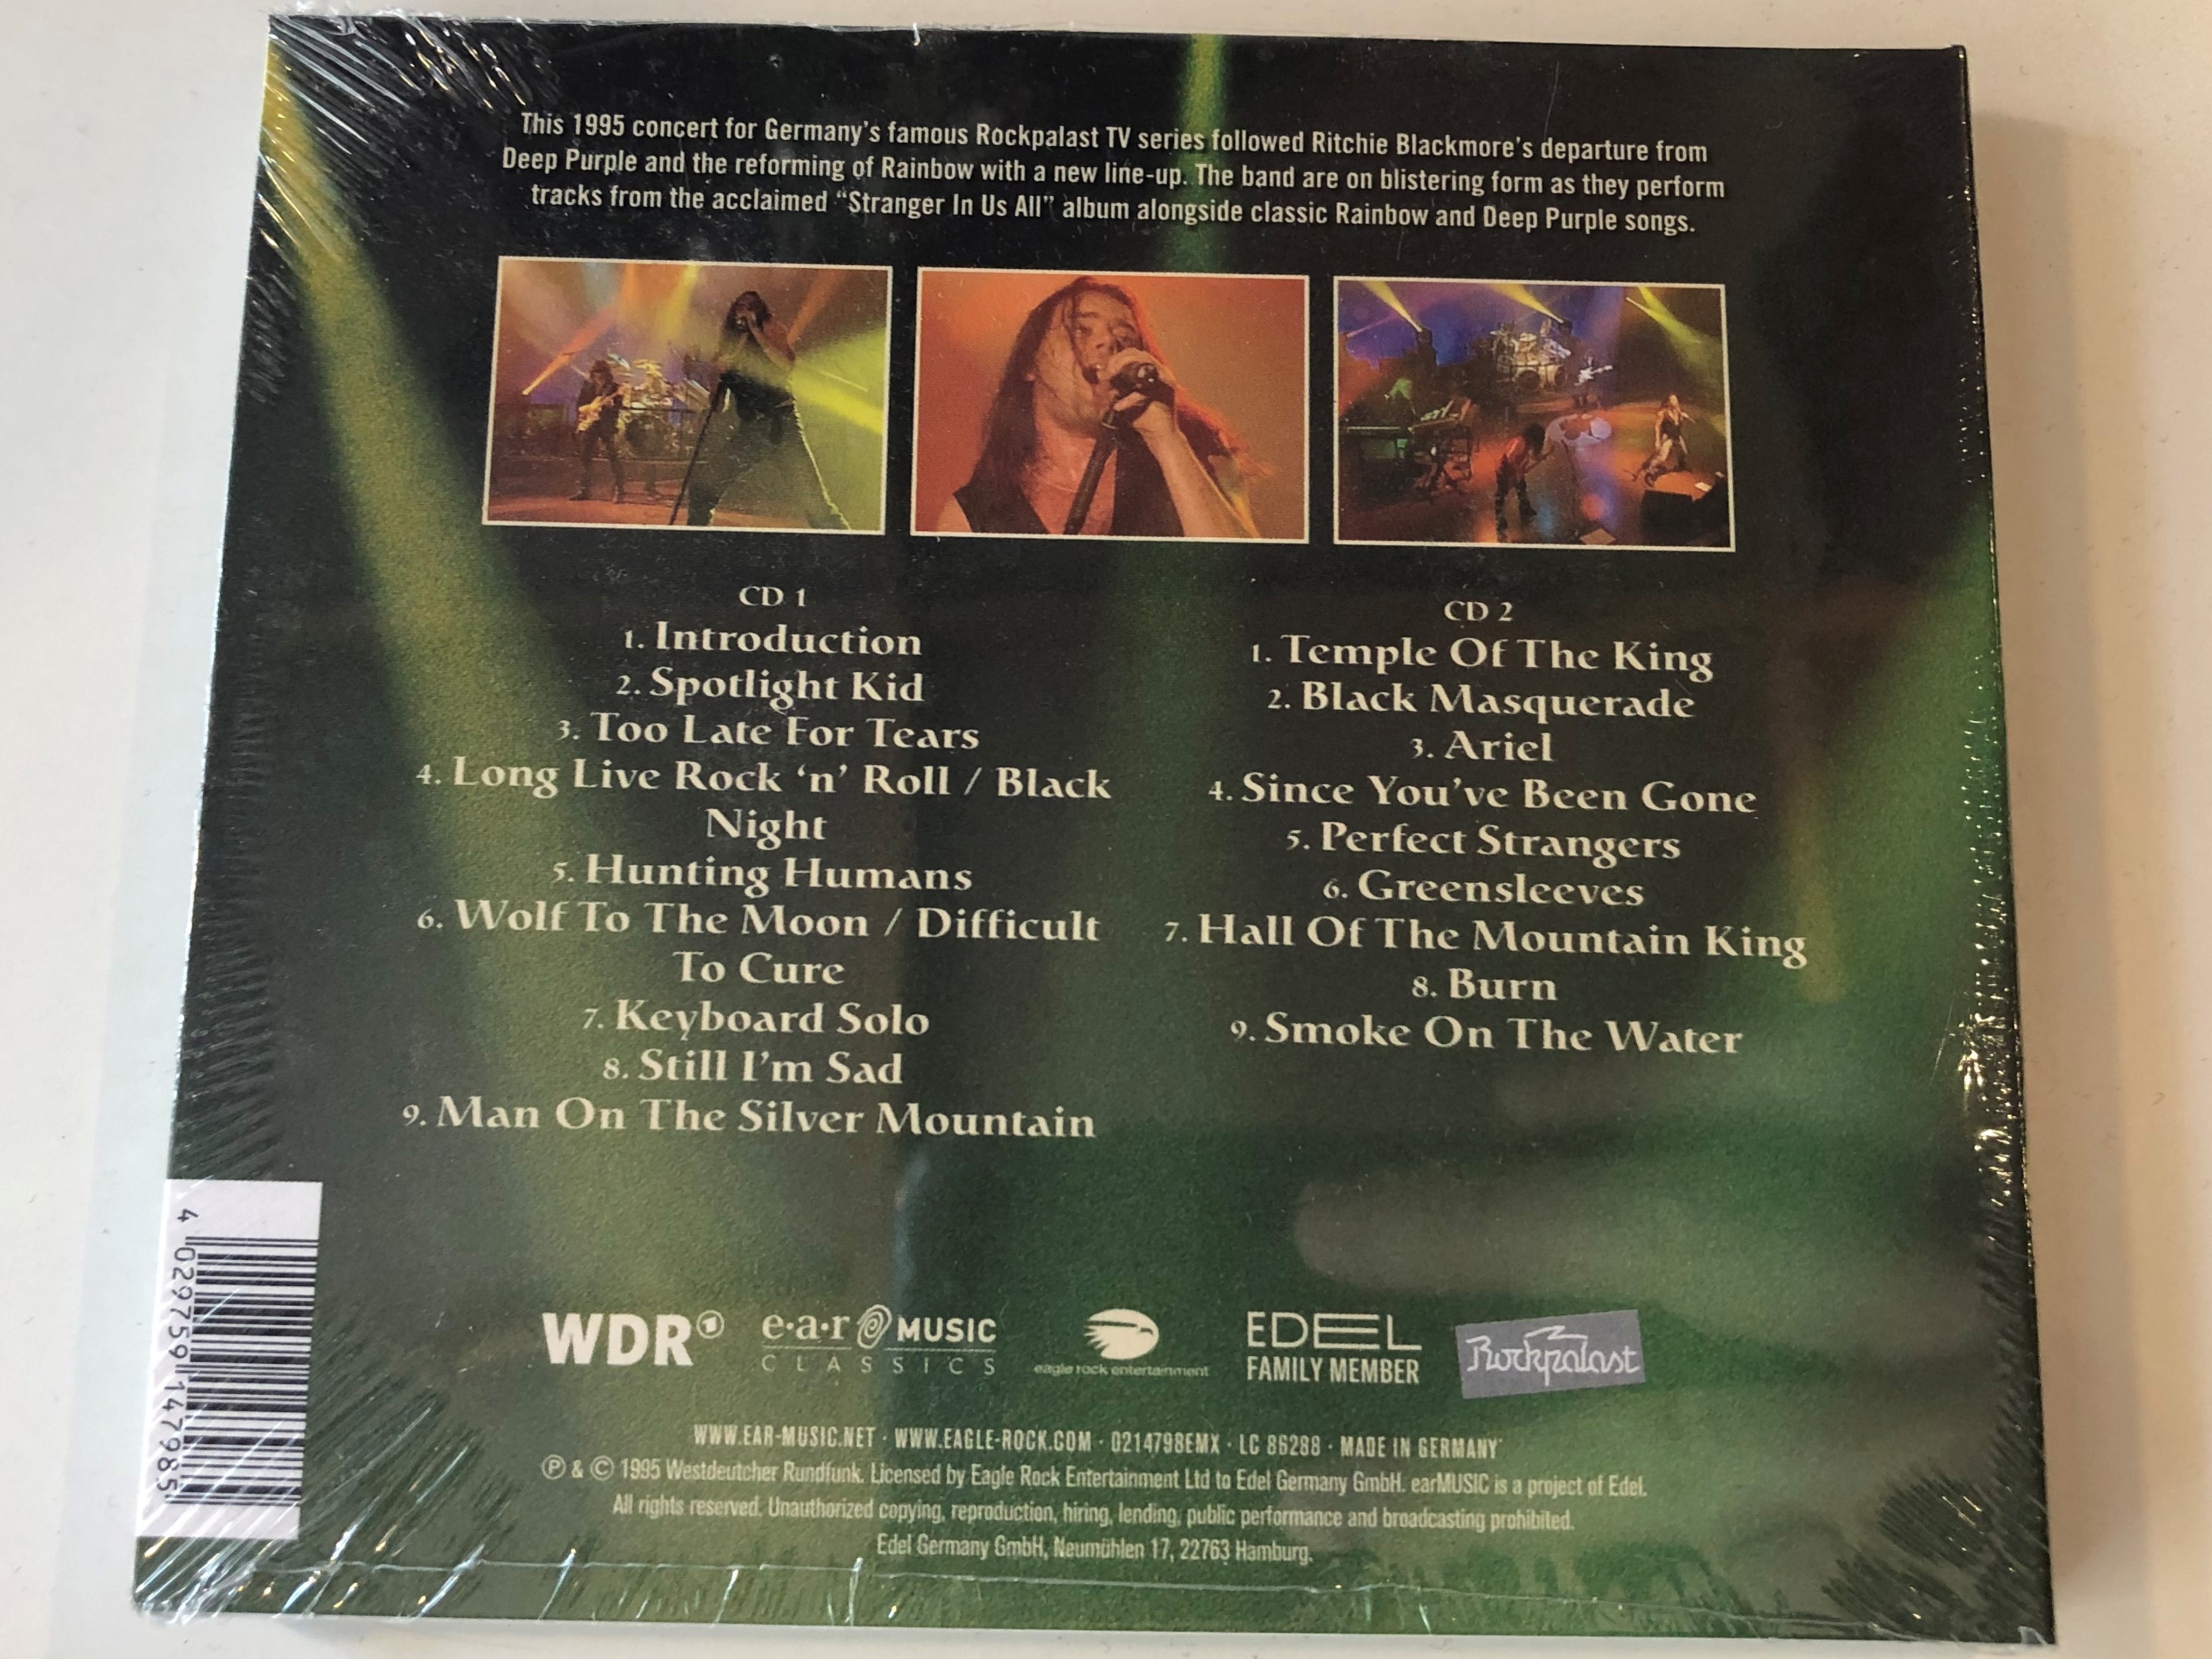 ritchie-blackmore-s-rainbow-black-masquerade-legendary-artists-wonderful-albums-avajlable-again-new-deluxe-editions-to-collect-cherish-love-ear-music-2x-audio-cd-1995-0214798emx-2-.jpg